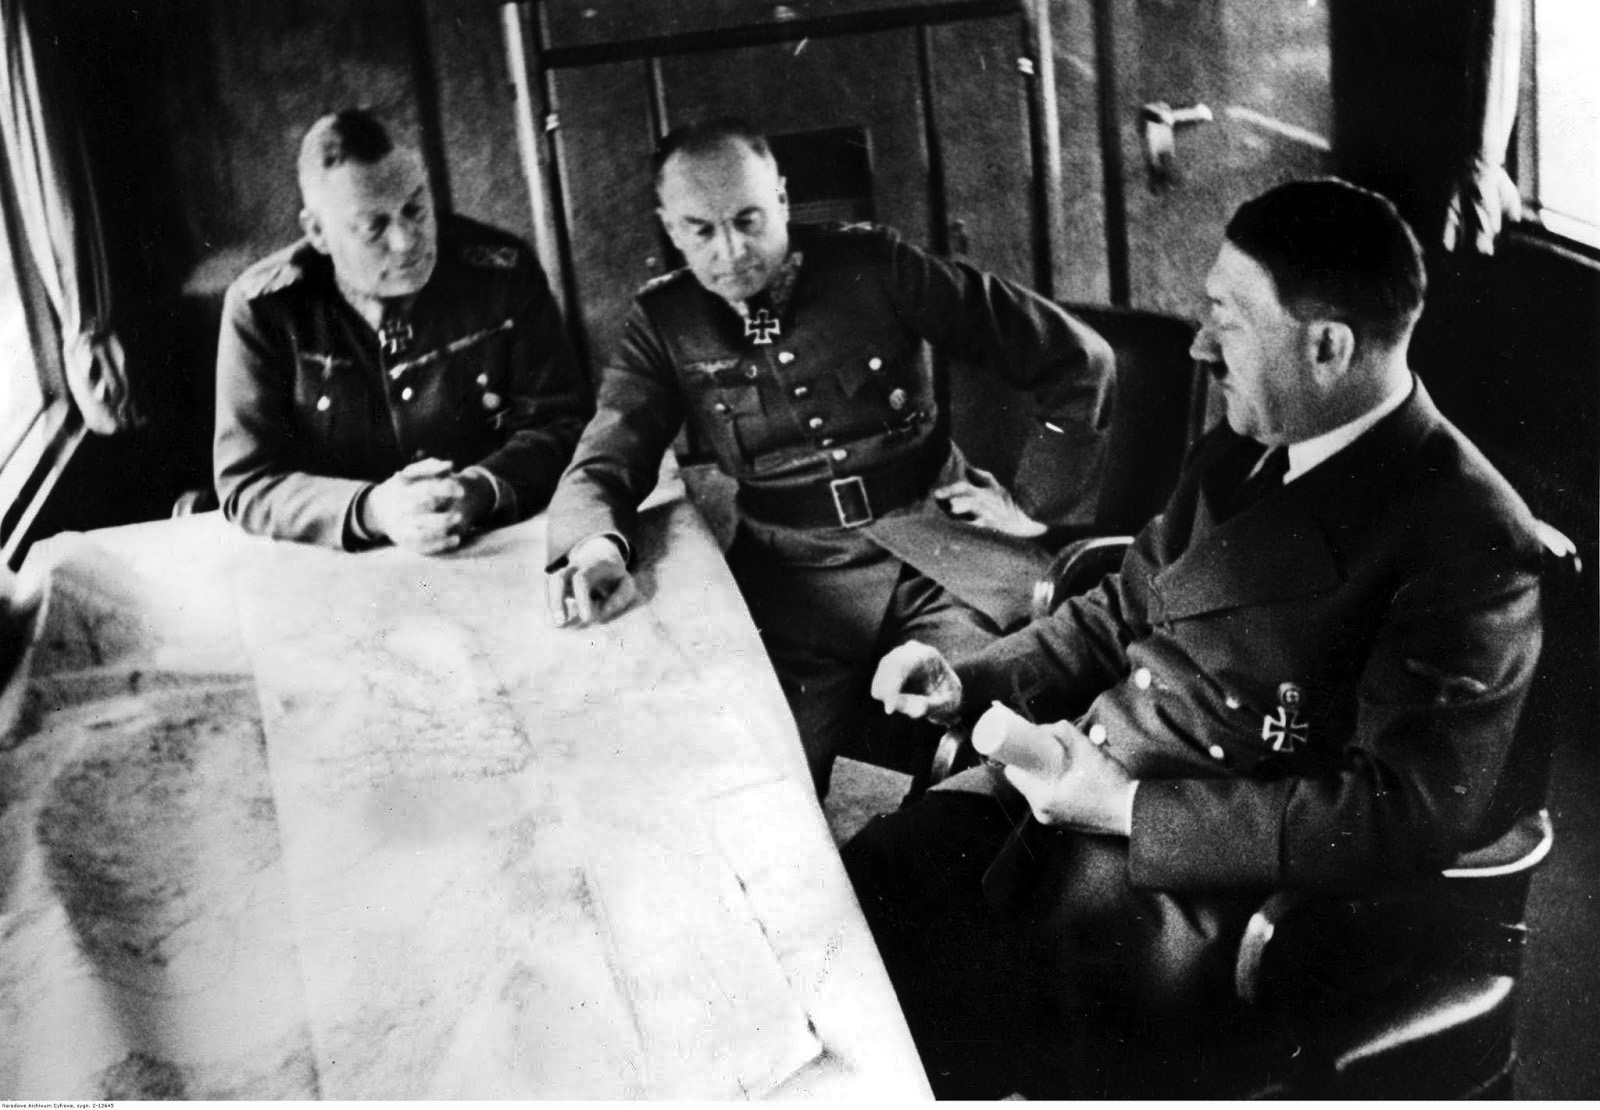 Hitler confers with his subordinates Field Marshal Wilhelm Keitel (left) and Field Marshal Walter von Brauchitsch (center) as the three contemplate a military map on the table before them. As Operation Barbarossa progressed, Hitler sacked Brauchitsch and took personal command of all German forces on the Eastern Front. TOP: The burned-out hulks of Soviet T-26 light tanks destroyed during early fighting against the invading Nazis lie derelict on the battlefield.